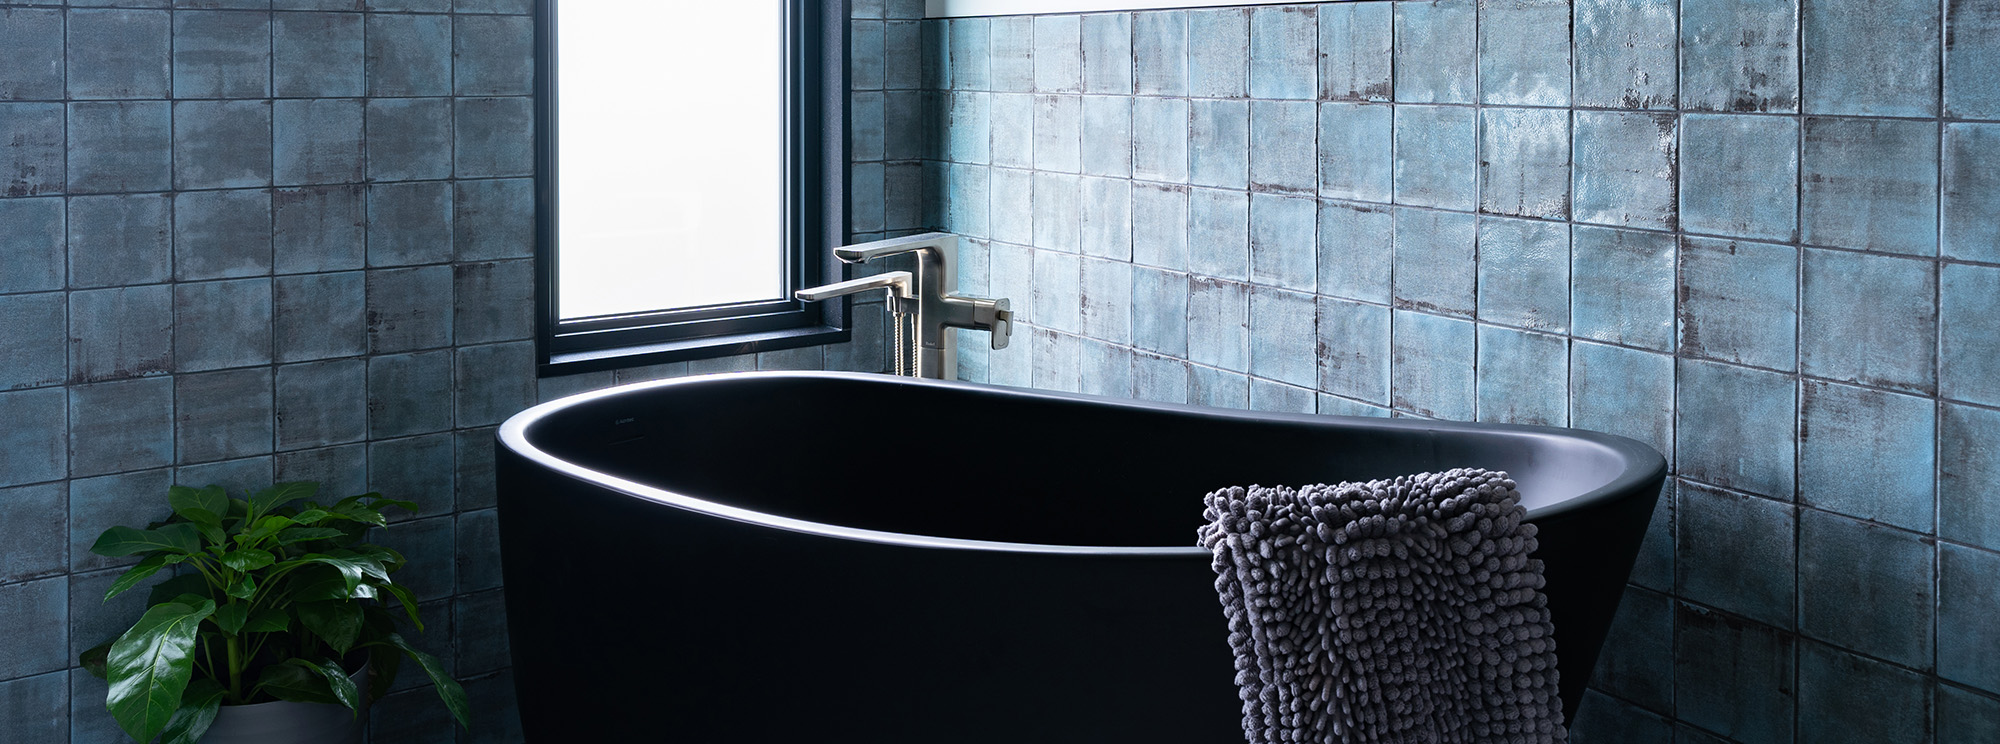 A sleek black bathtub in a bathroom with cool blue tiles. A perfect blend of elegance and tranquility.